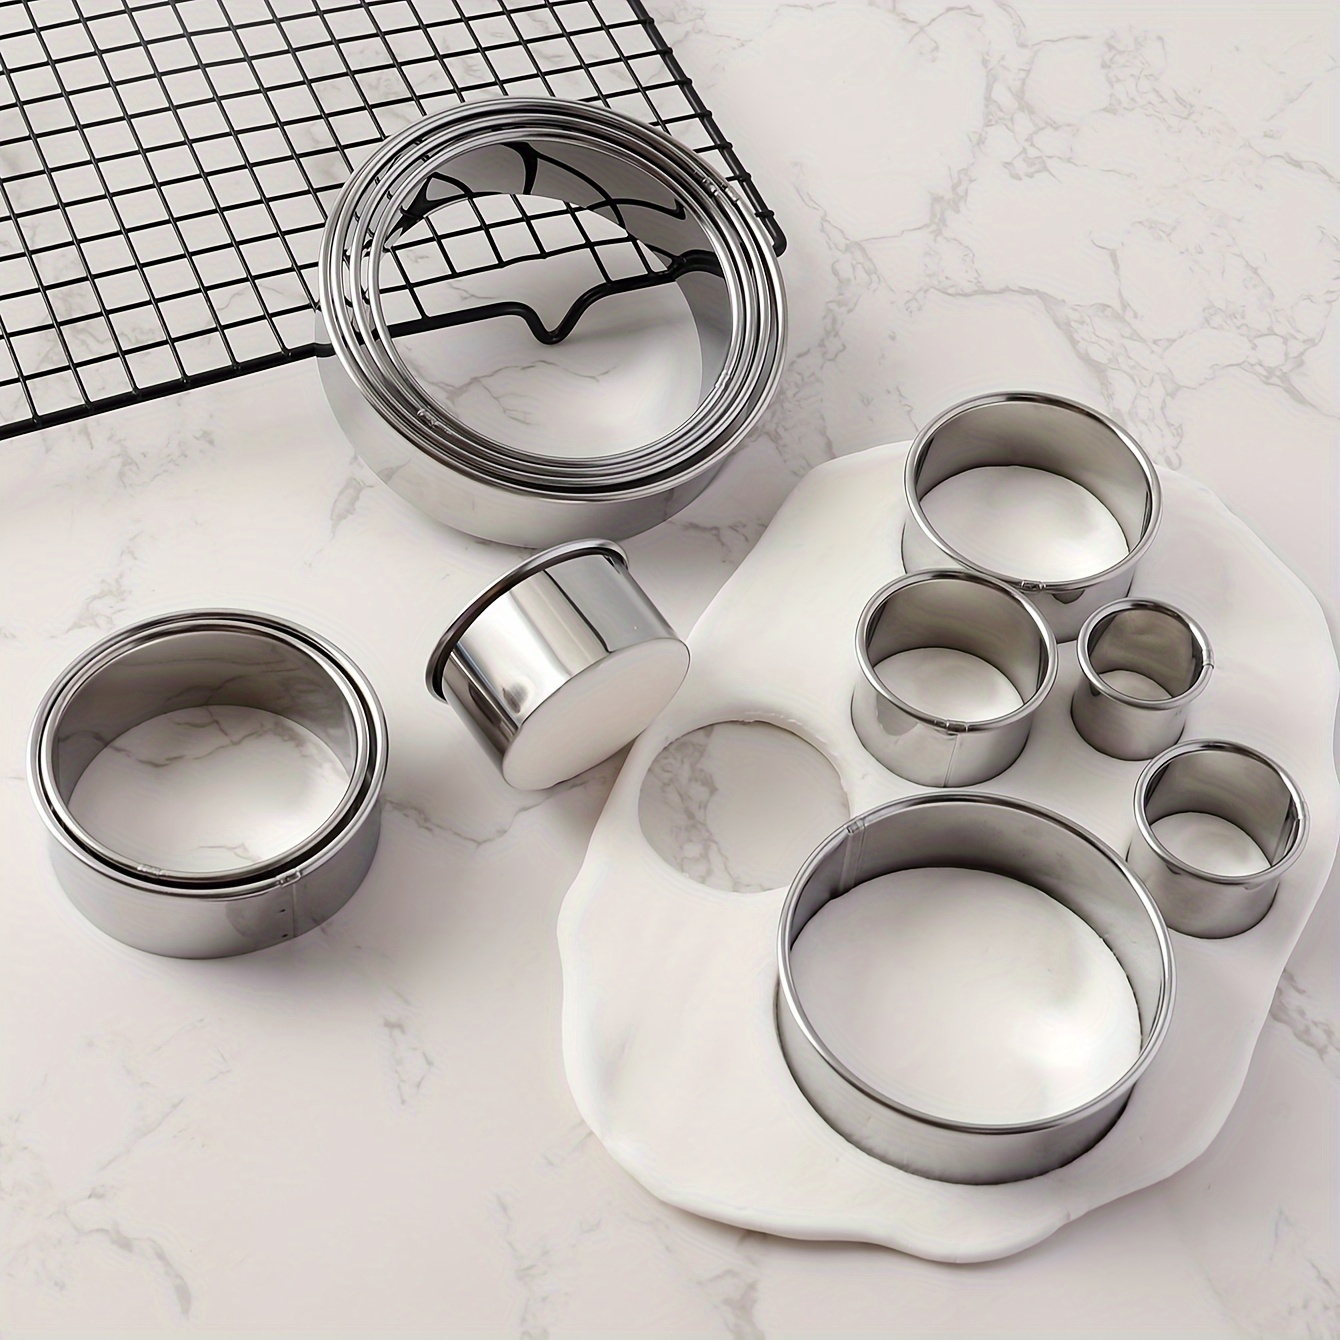 Pastry & Biscuit Cutters Round Set